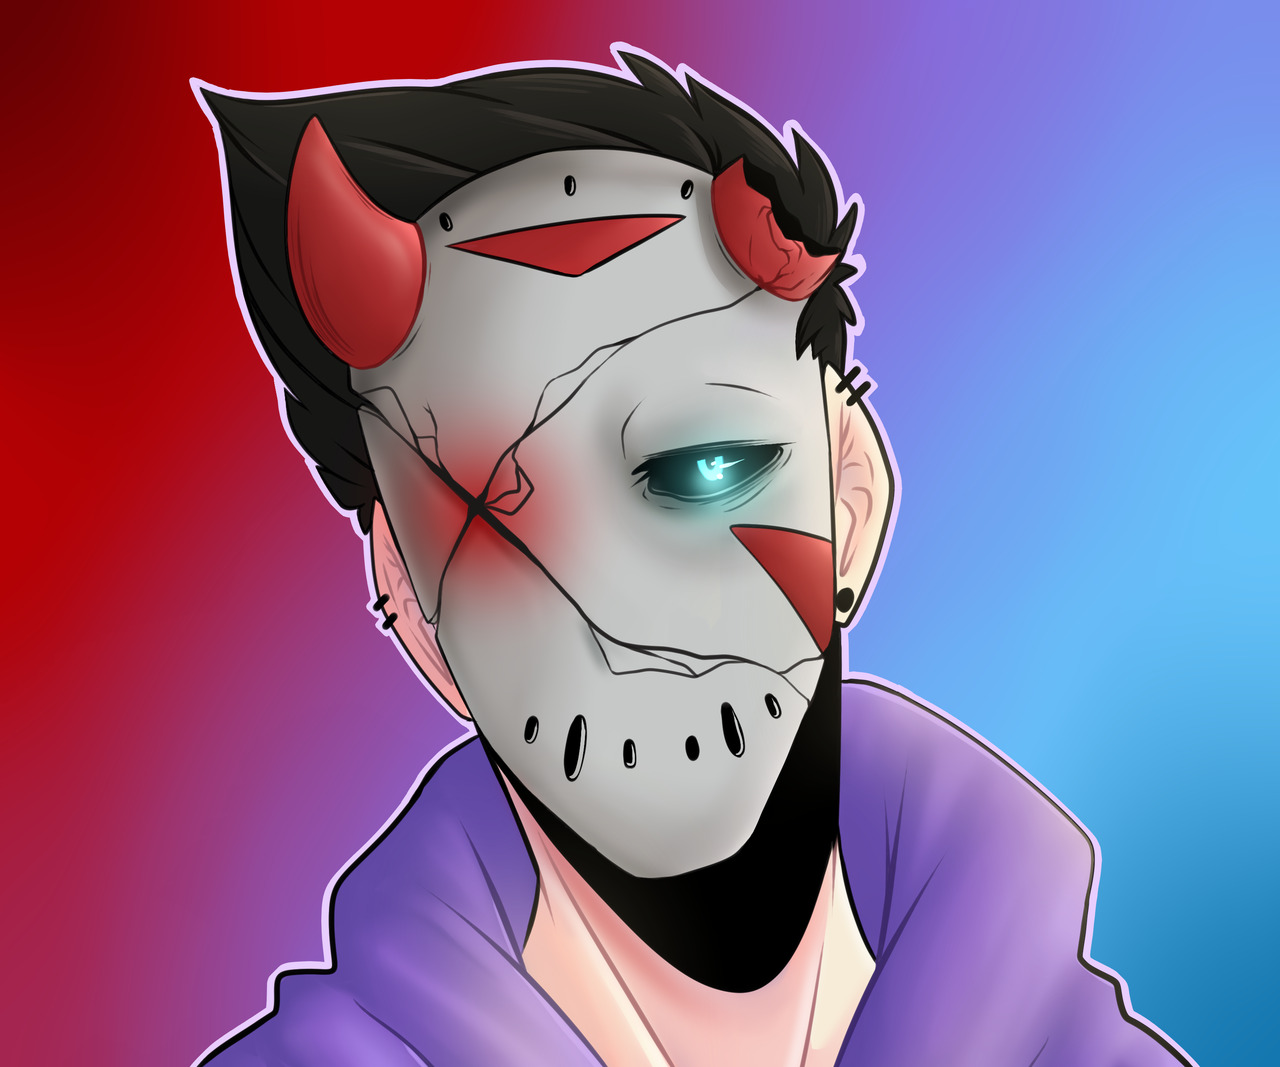 Here is some fanart for @cartoonz based on his king toonz @youtooz figure. 